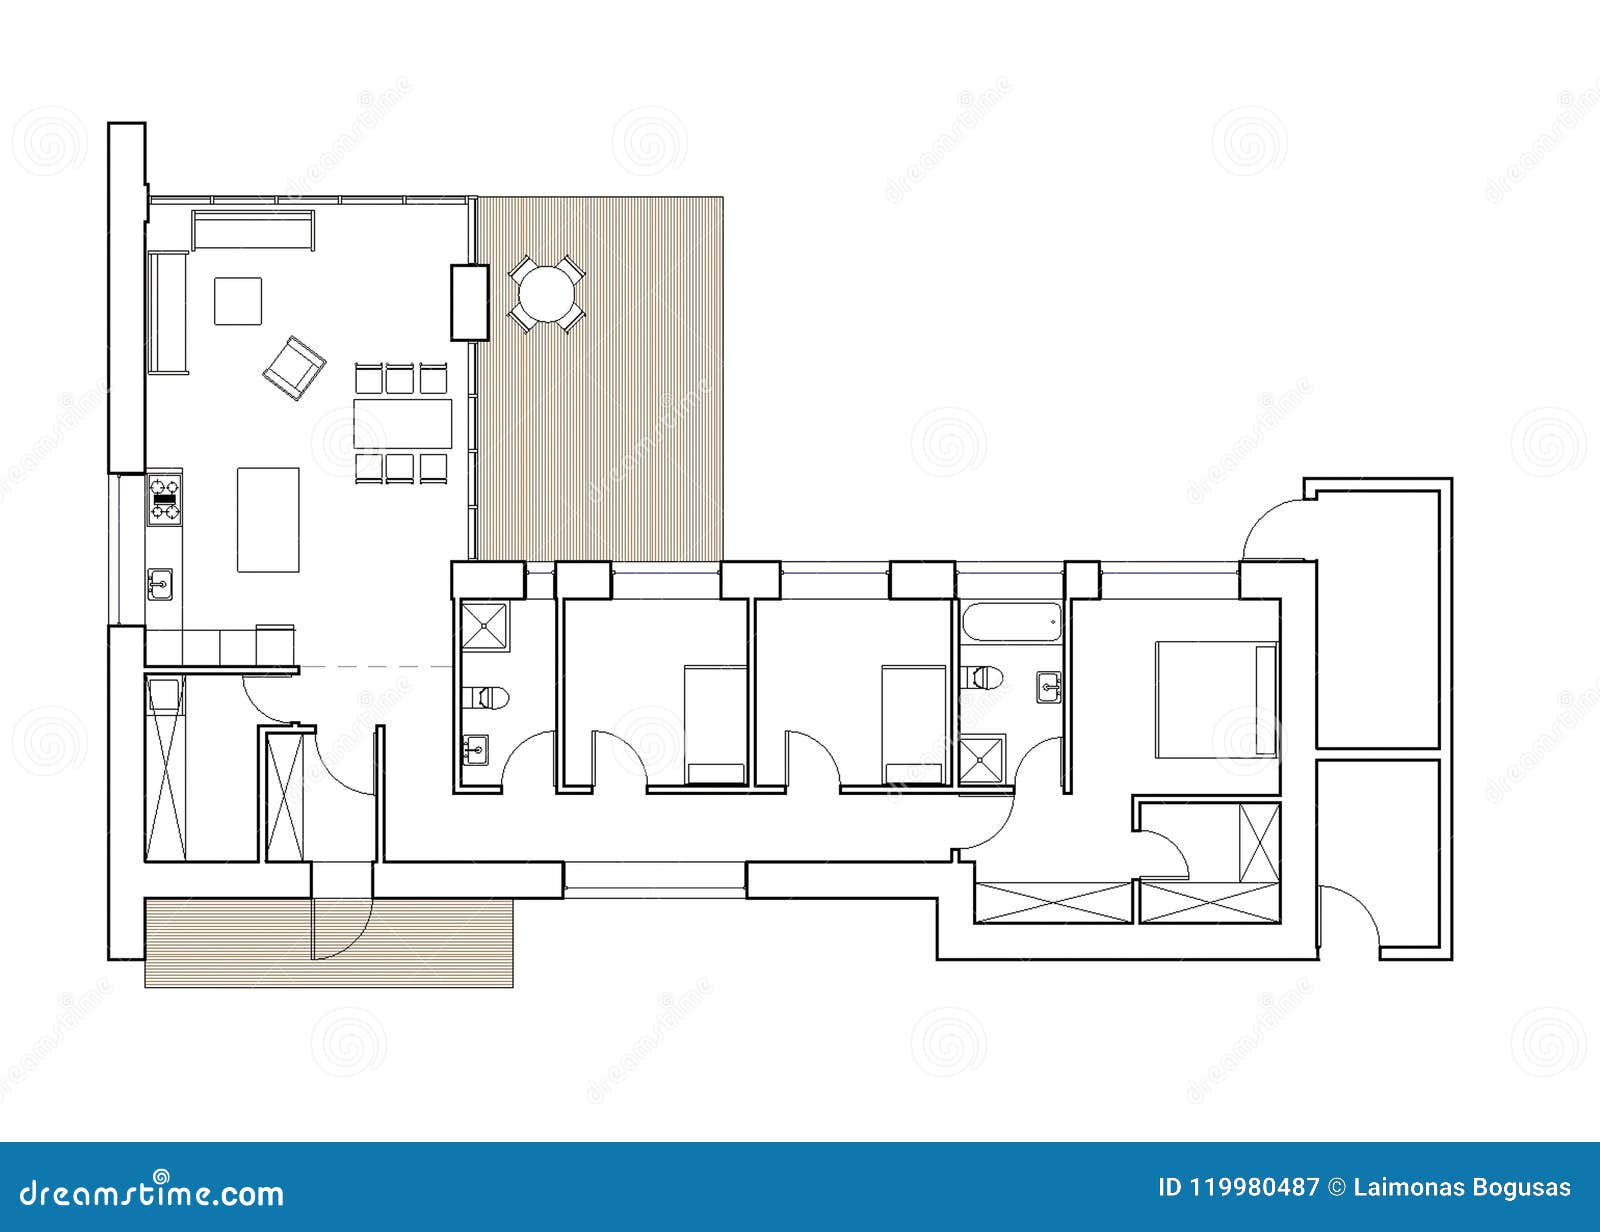 Drawing Floor Plan Of The Single Family House Stock Vector